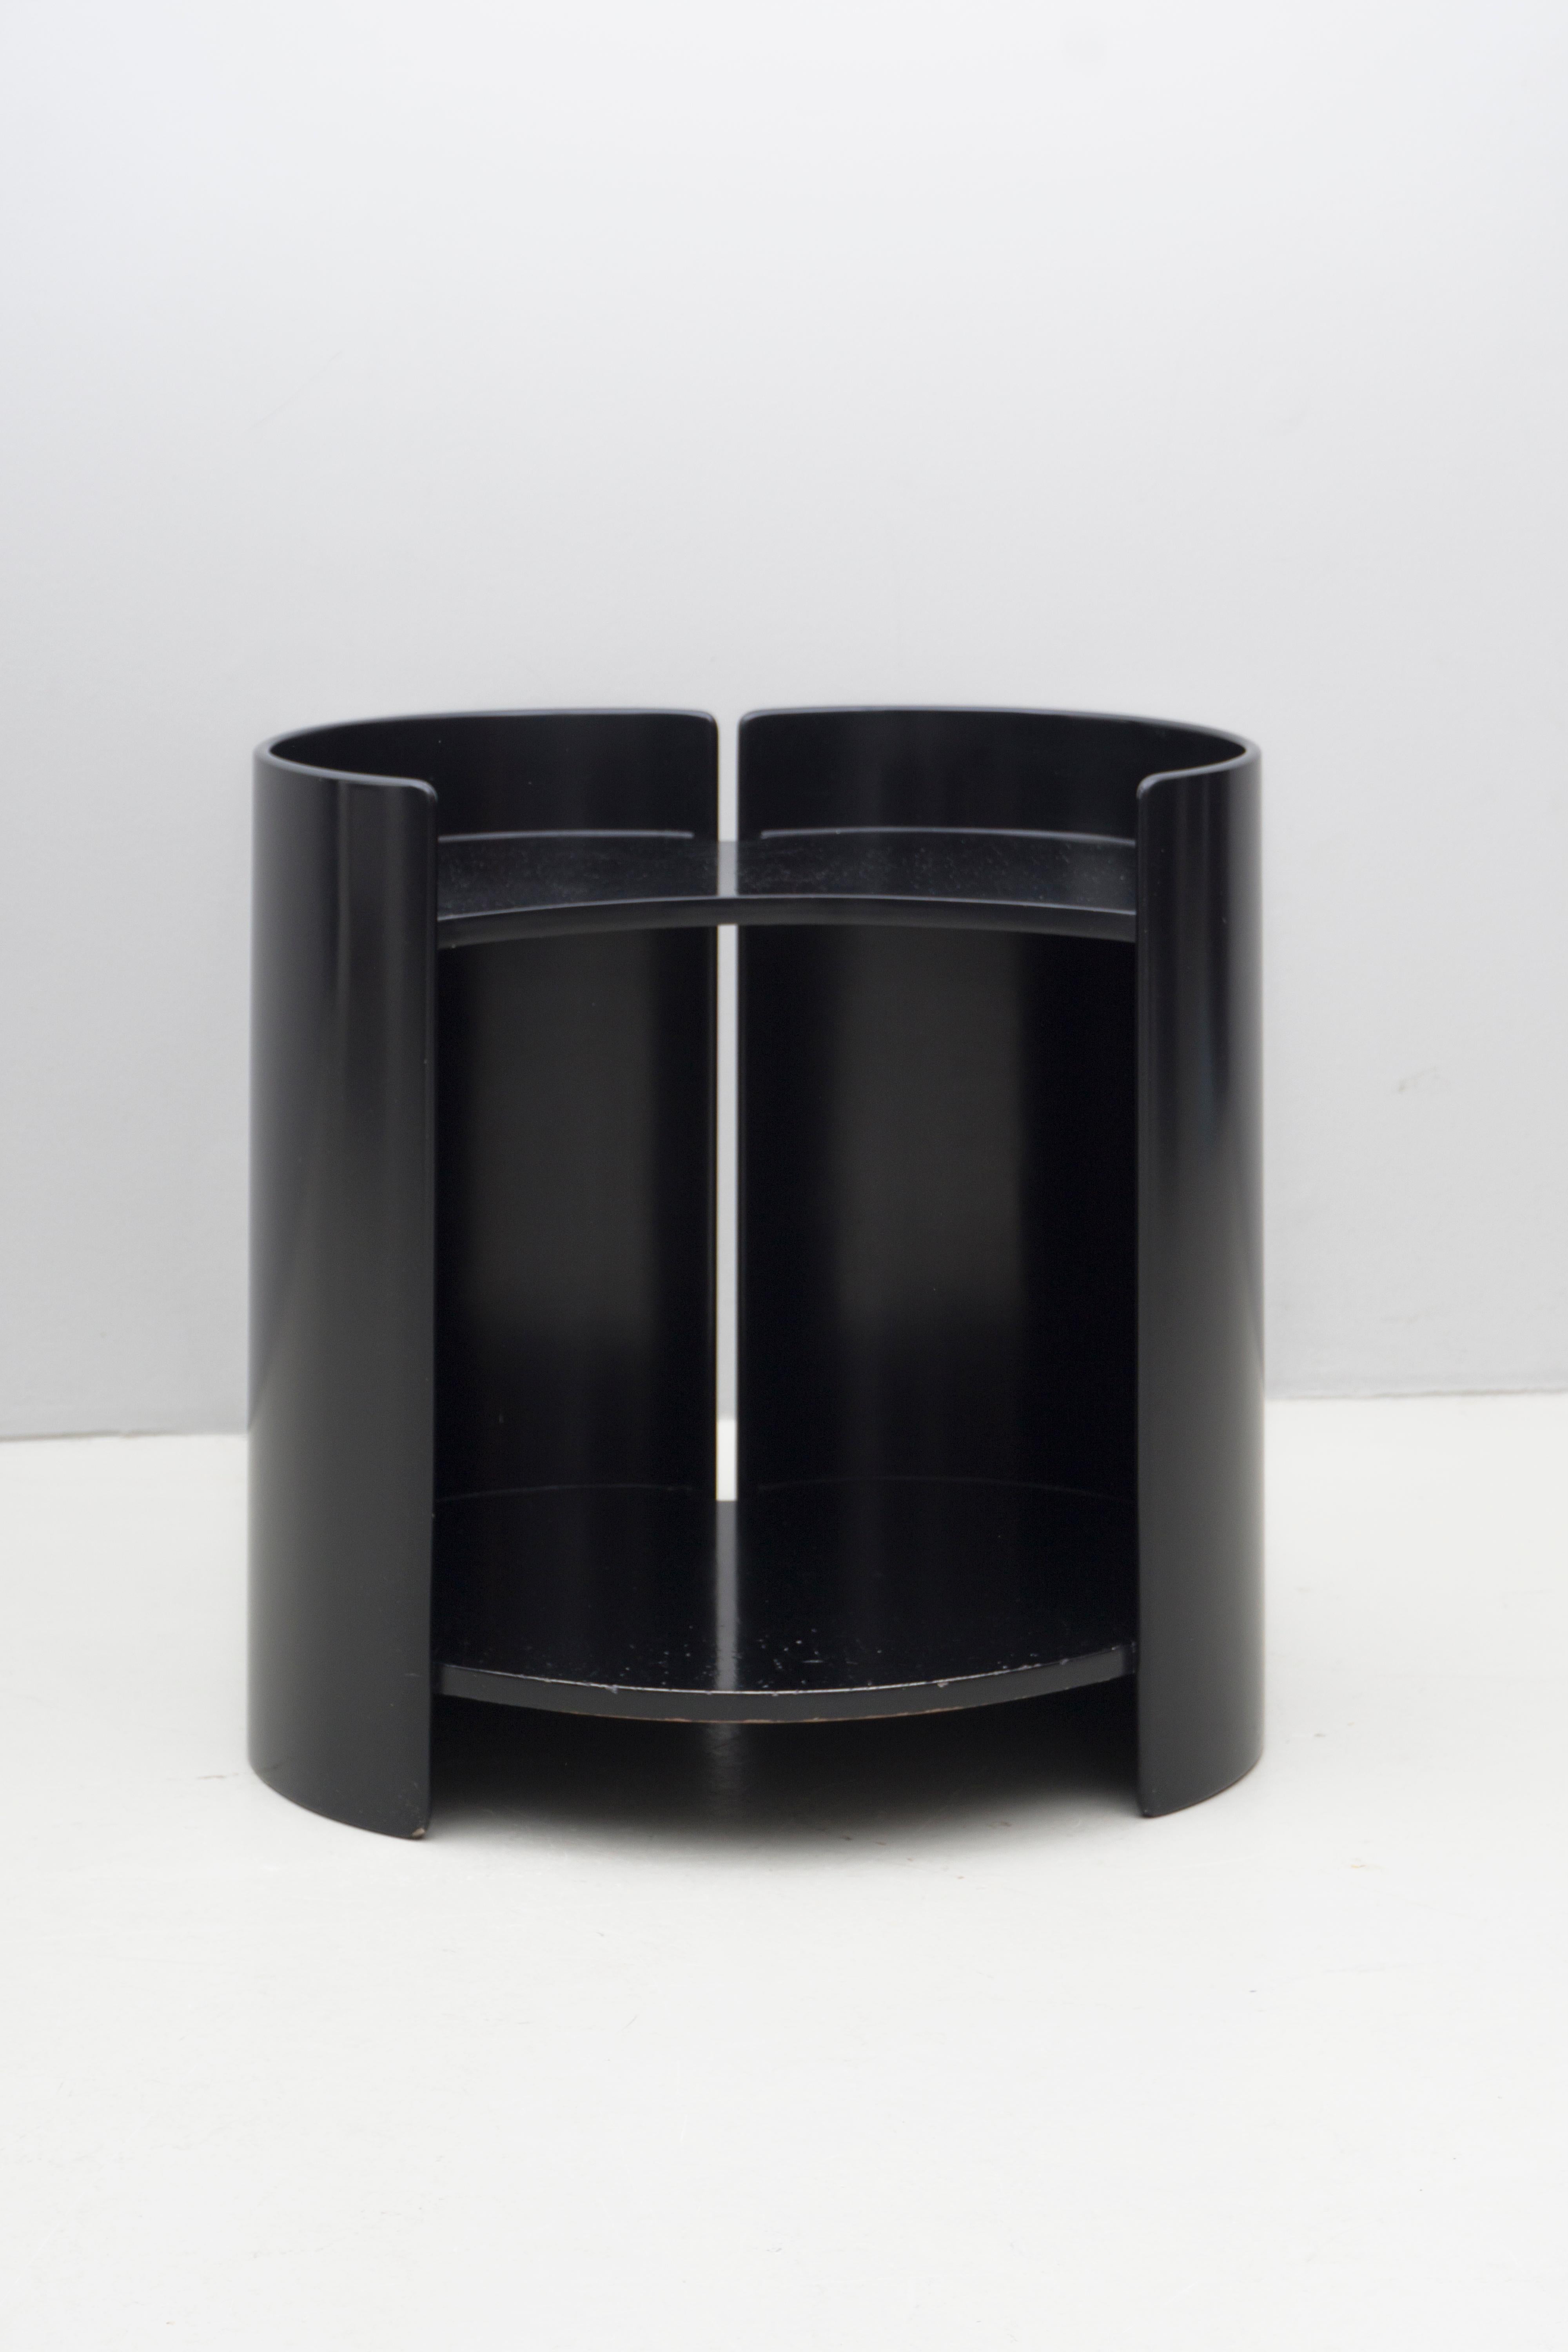 Side table model 'GEA' 
laminated wood, black lacquered.
Dimension / L. 54 cm W. 42 cm H. 52cm.
Design / Kazuhide Takahama 1961
Manufacturer Gavina Italy

Takahama is best known as a furniture and lighting designer, and has produced work for